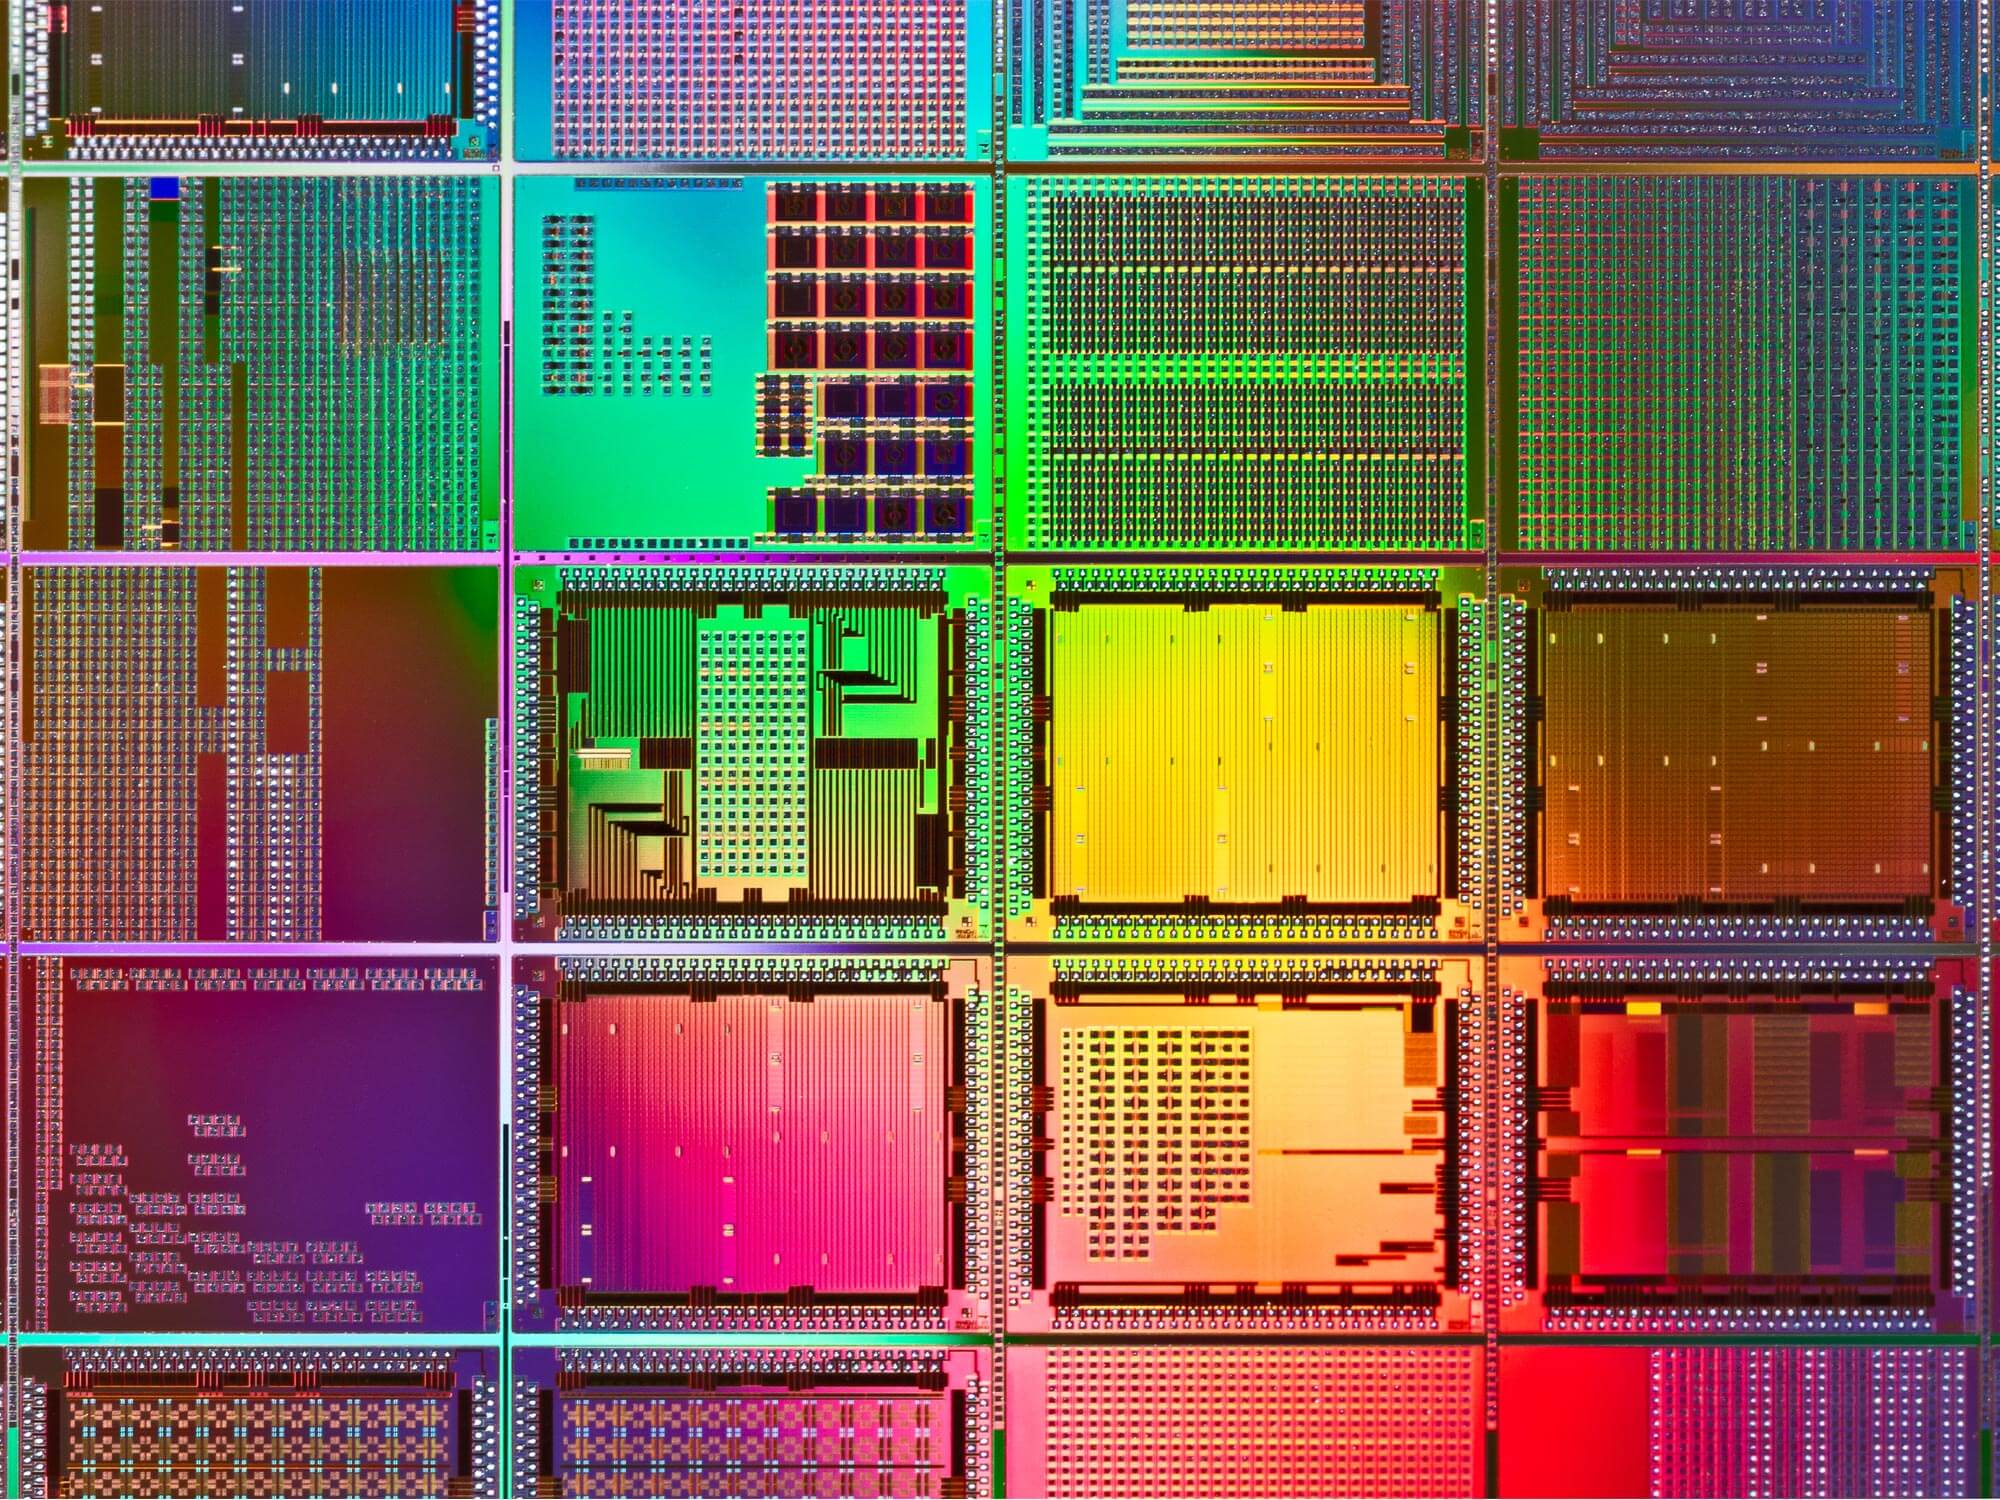 Image of computer chips by MirageC